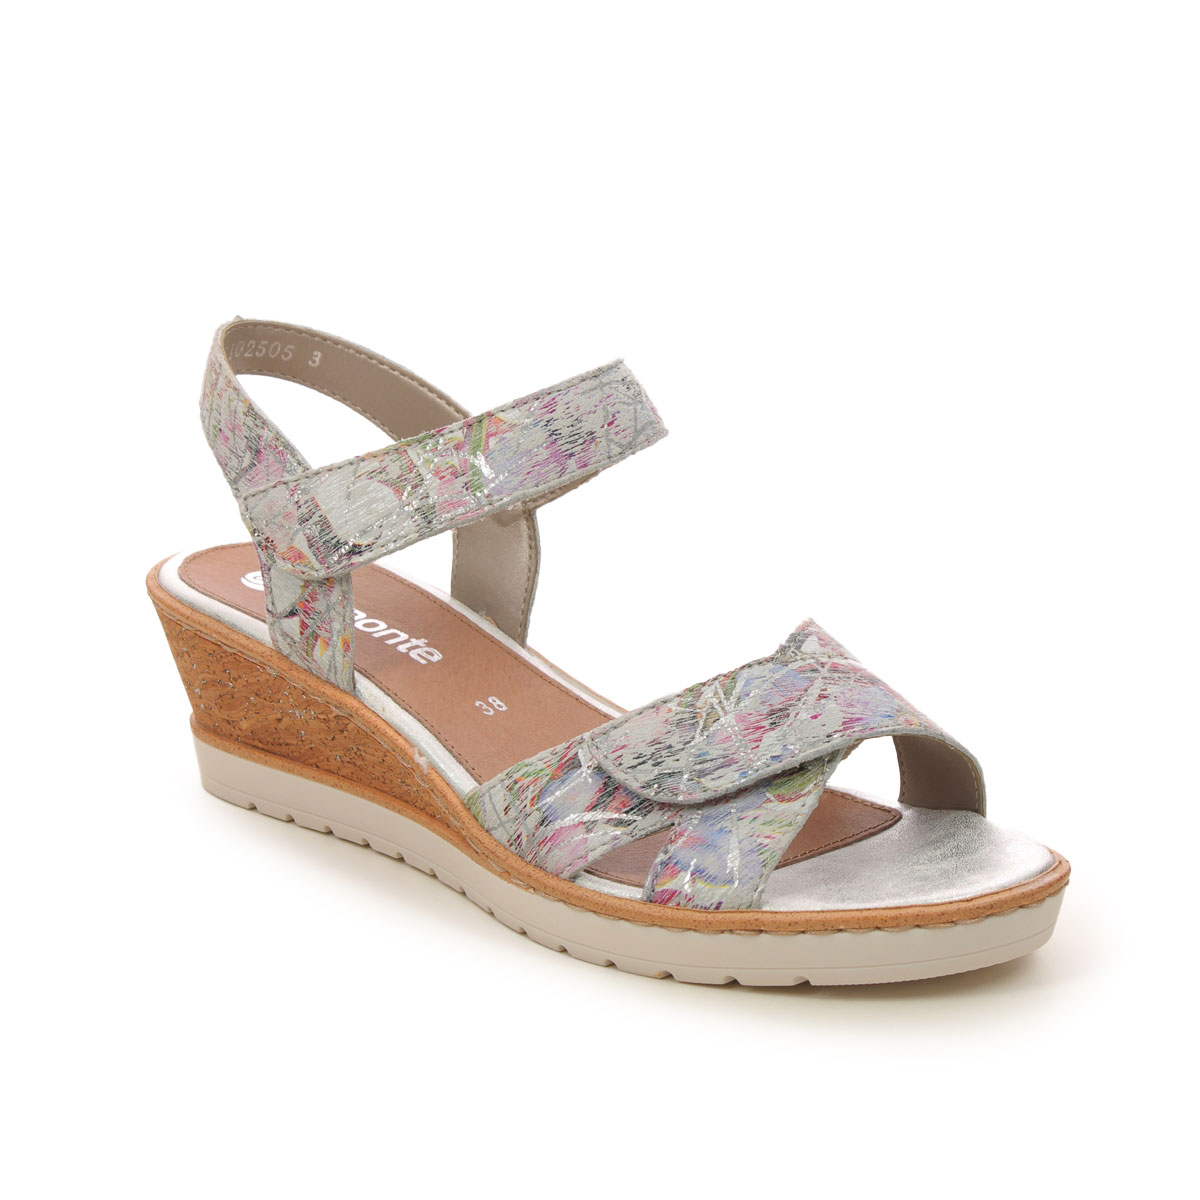 Remonte R6252-92 Hyfavel Floral print Womens Wedge Sandals in a Plain Leather in Size 40